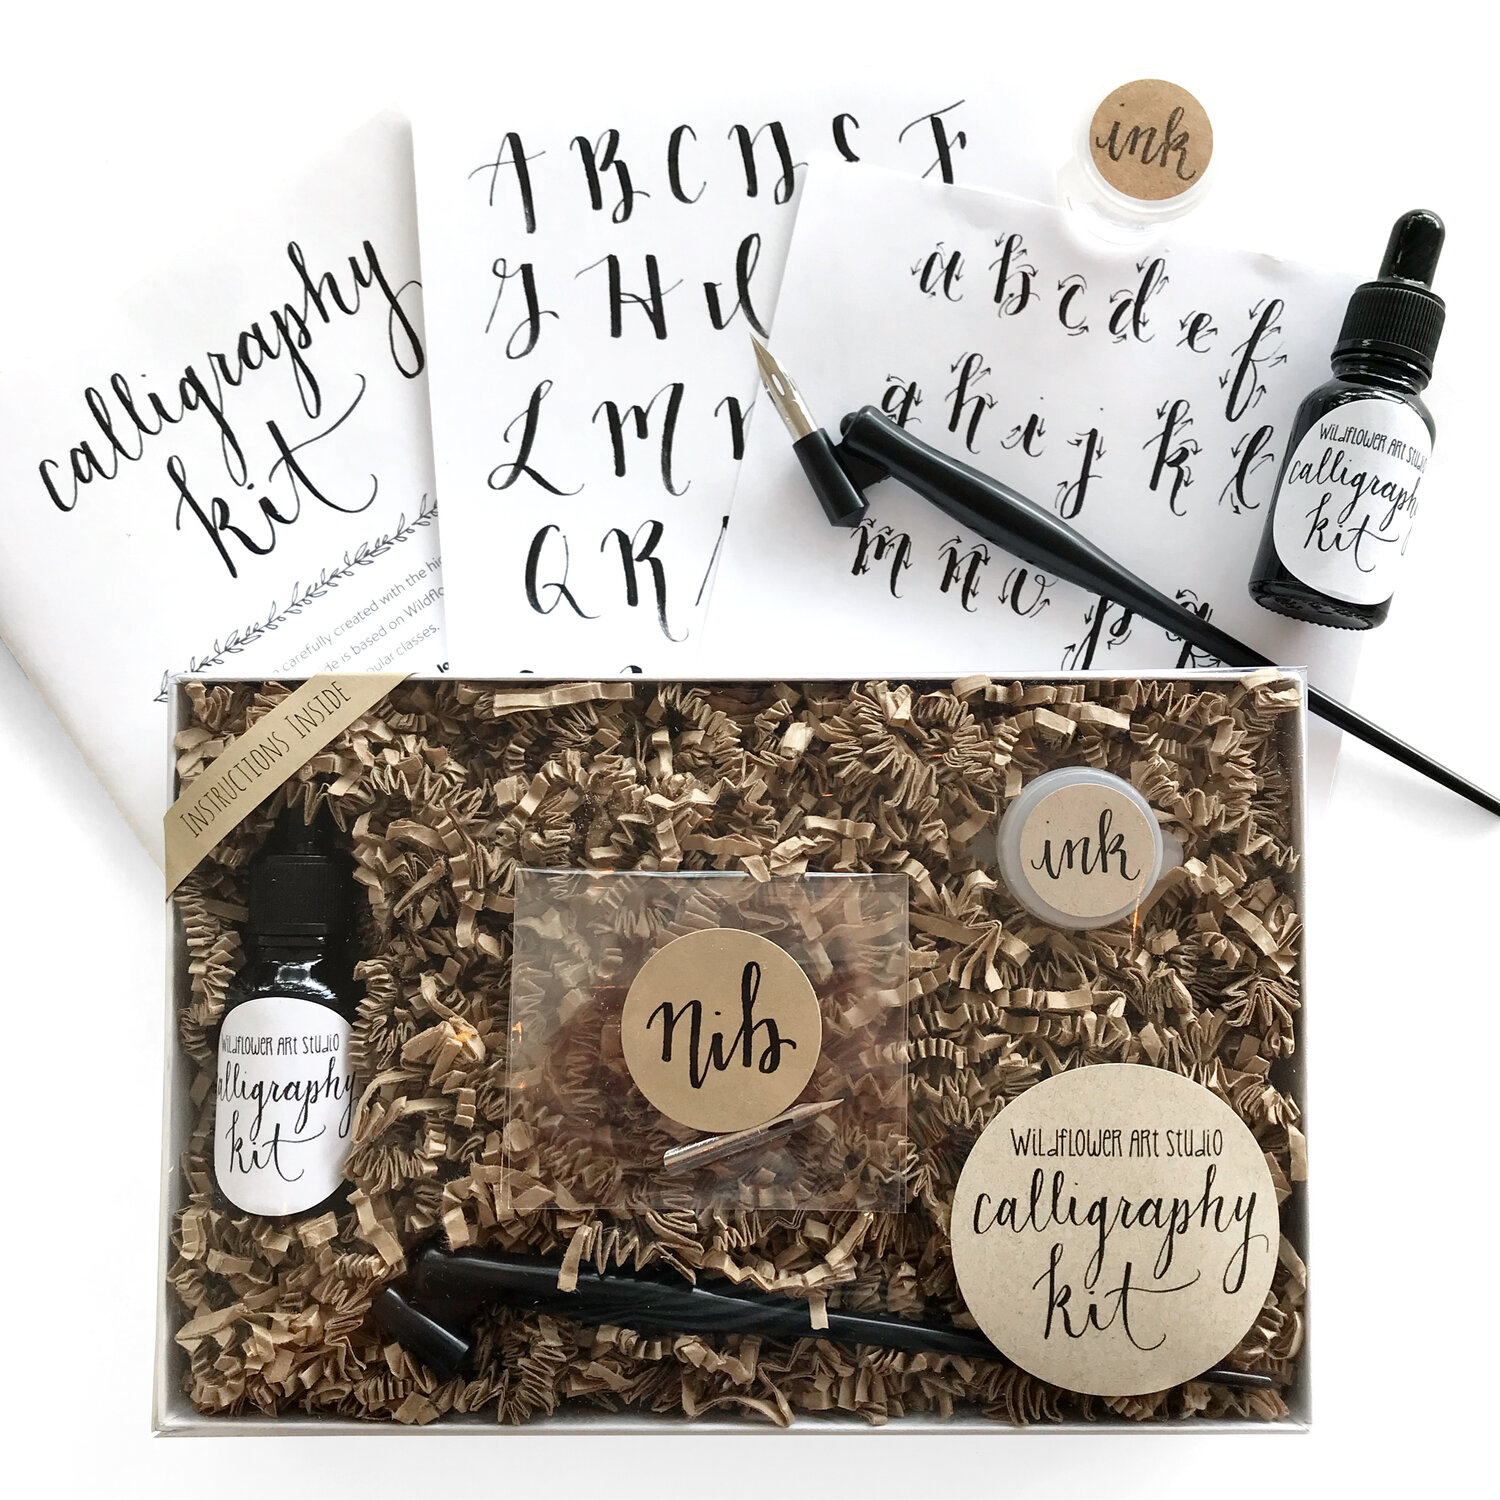 Calligraphy Kits and Essentials